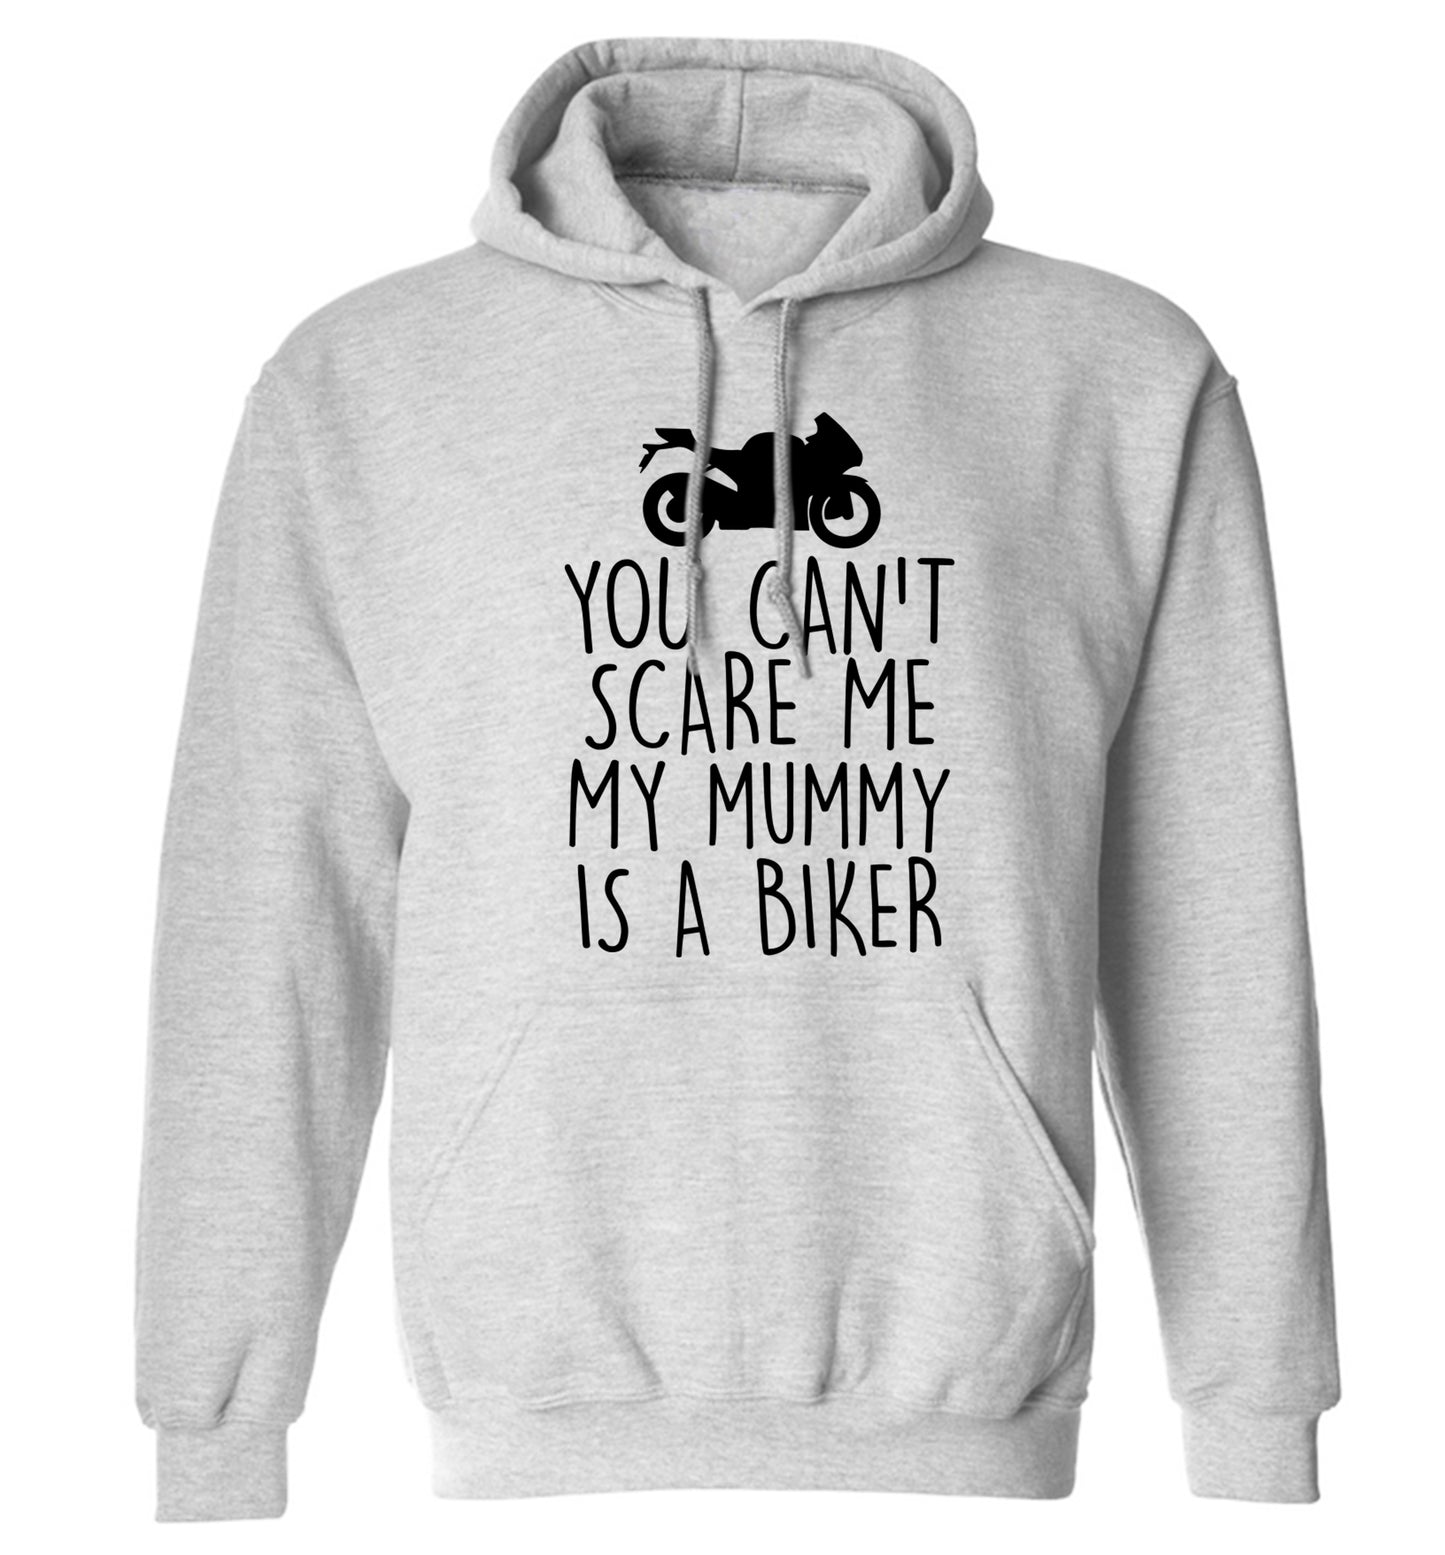 You can't scare me my mummy is a biker adults unisex grey hoodie 2XL